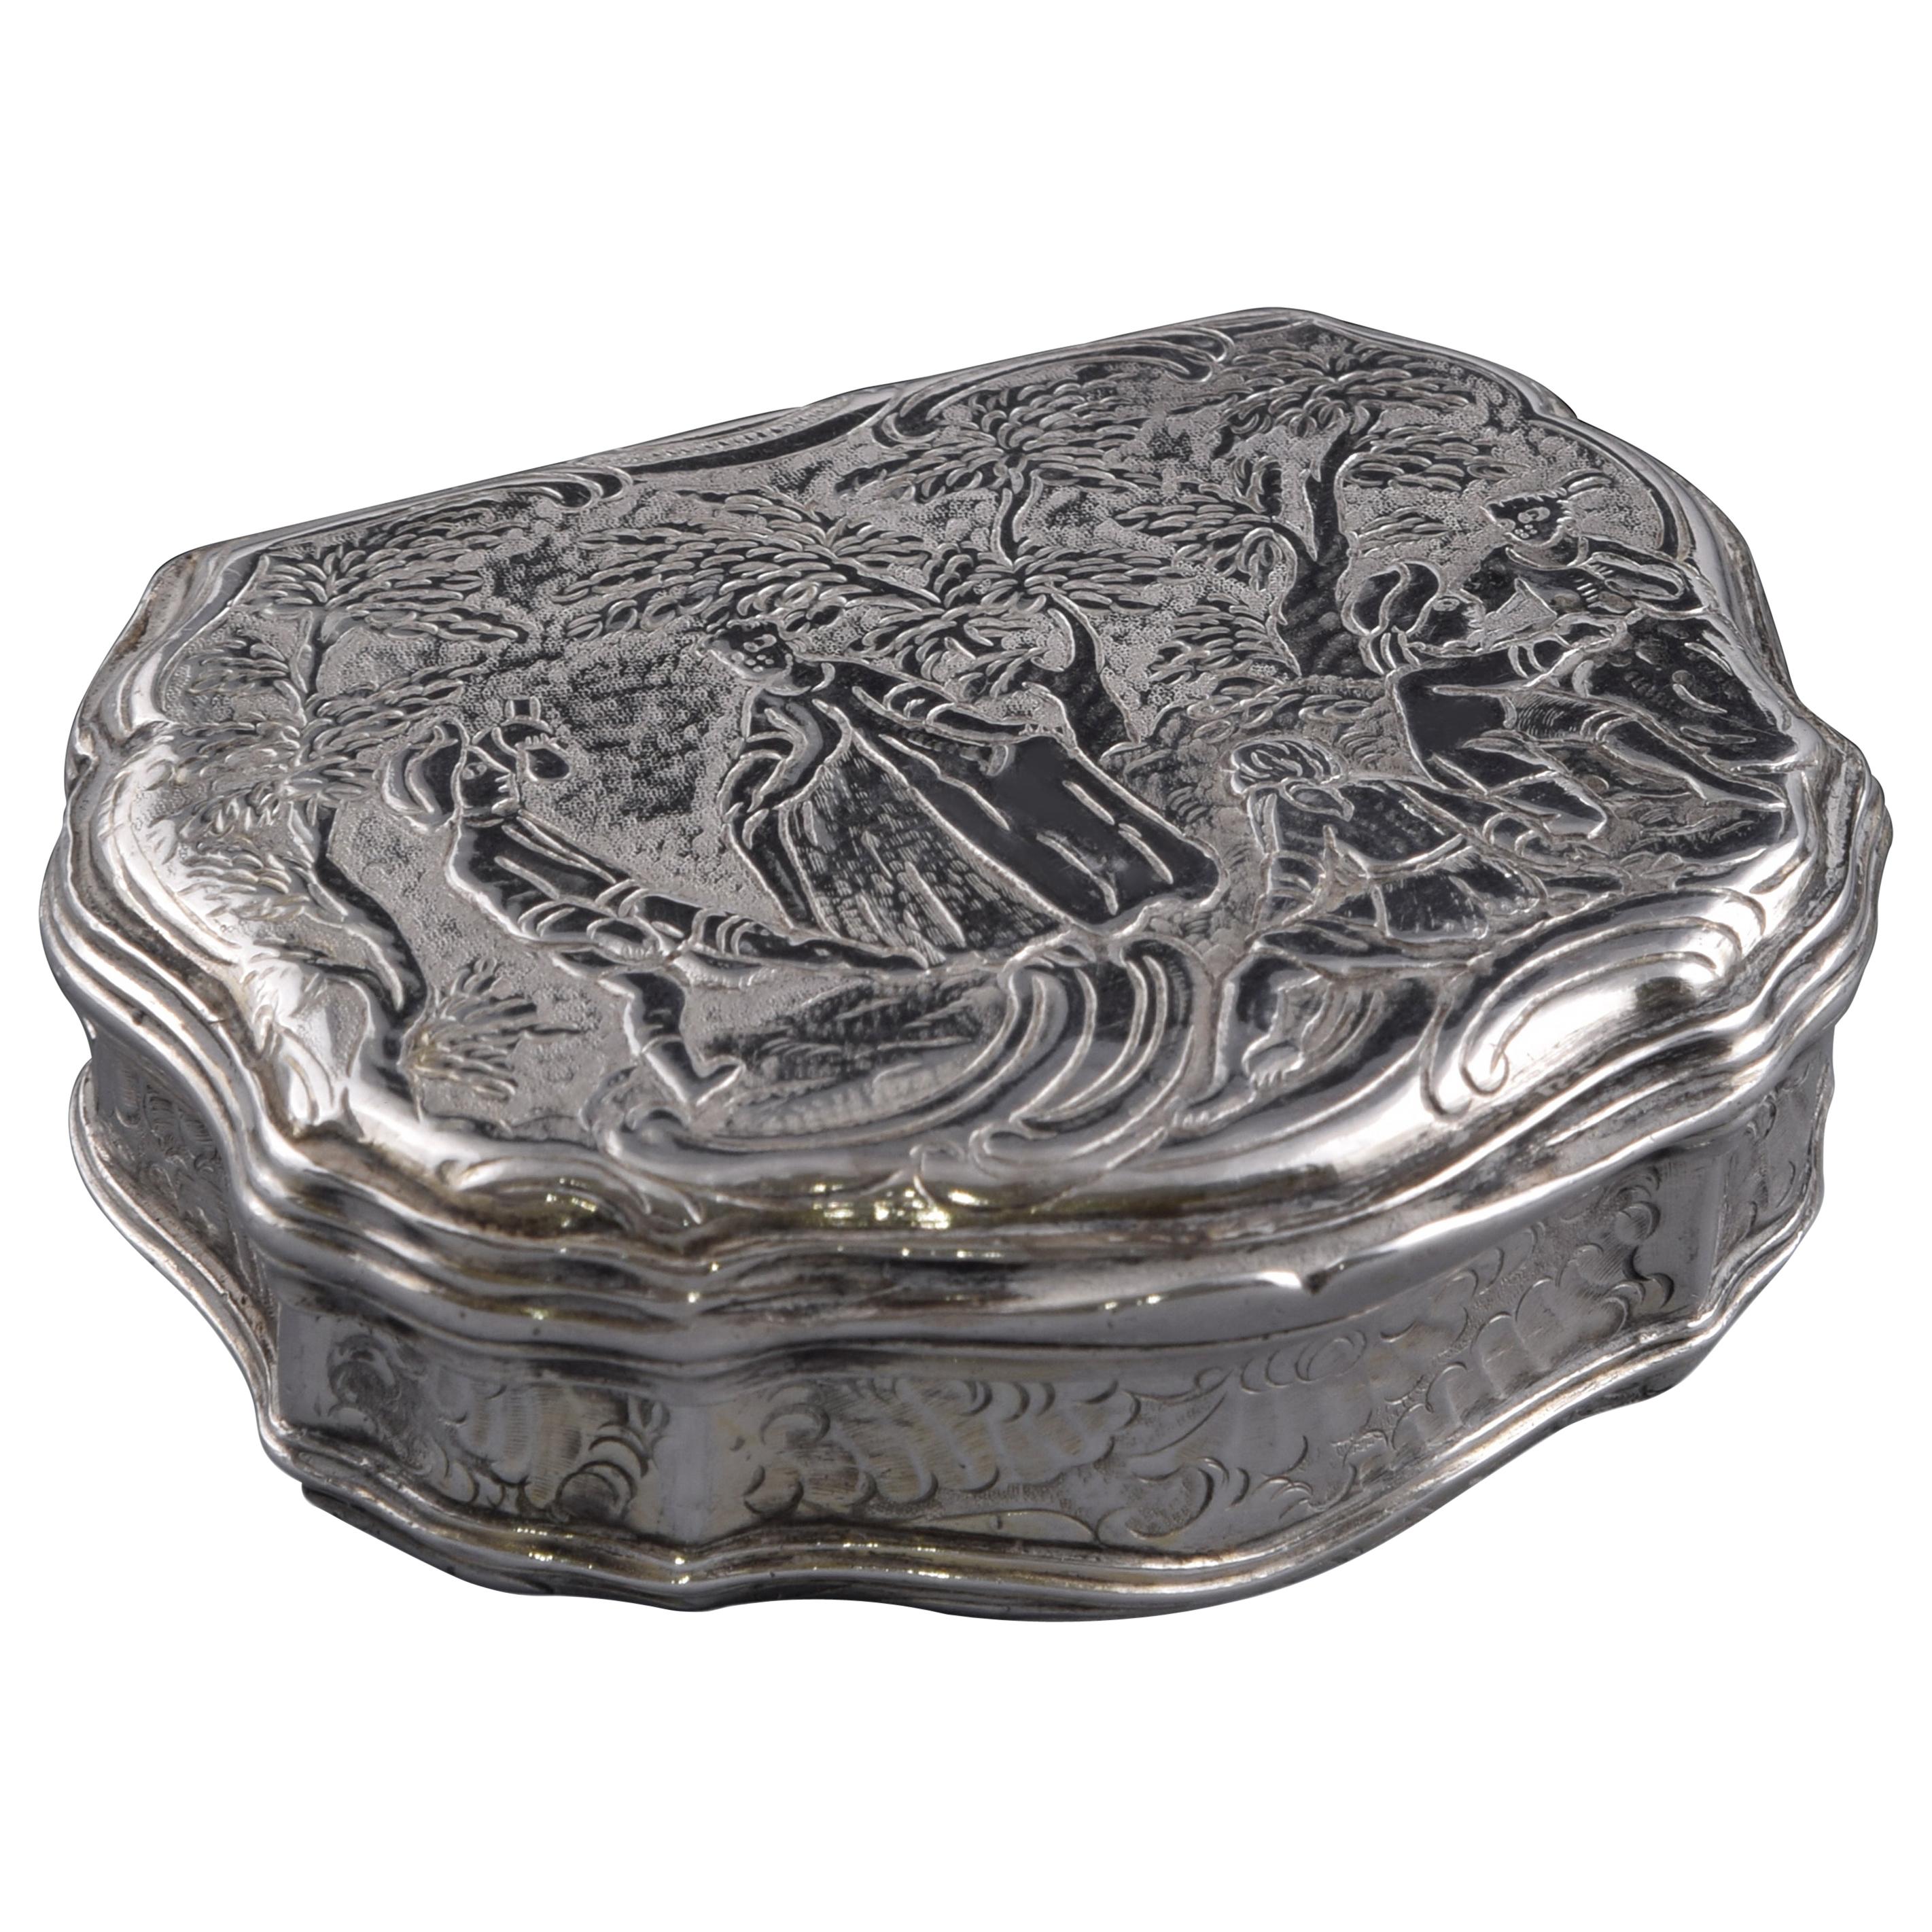 Silver Box, Possibly England, 19th Century